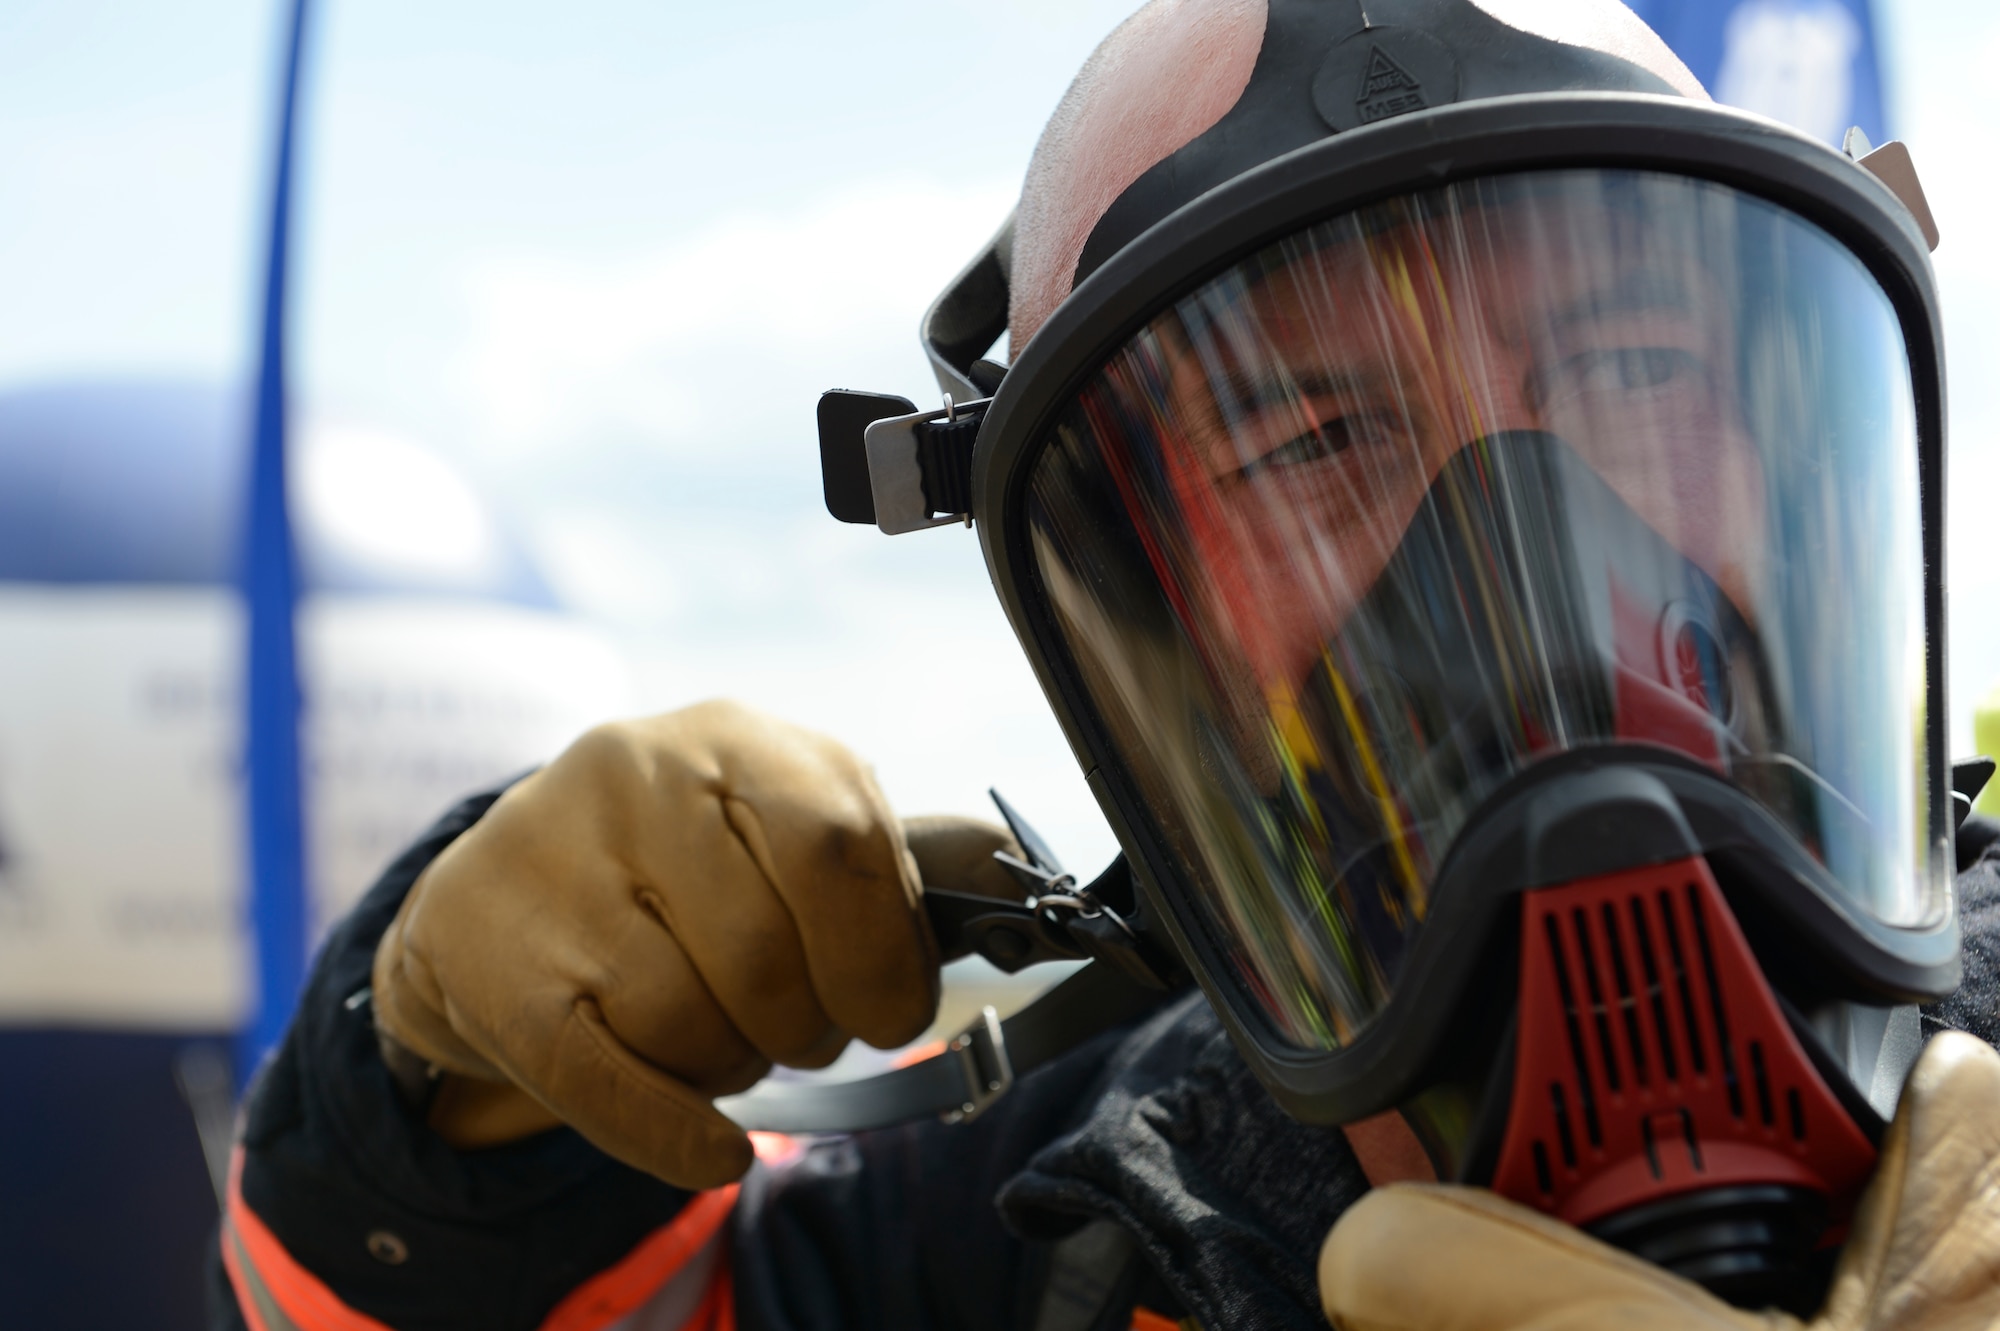 SPANGDAHLEM AIR BASE, Germany – Gerd Mueller, 52nd Civil Engineer Squadron firefighter from Gransdorf, Germany, prepares for a race during the Szczecin Firefighter Combat Challenge in Szczecin, Poland Aug. 10, 2013. Mueller placed first in the individual race for participants in the 40-50 age range. (U.S. Air Force photo by Staff Sgt. Christopher Ruano/Released)